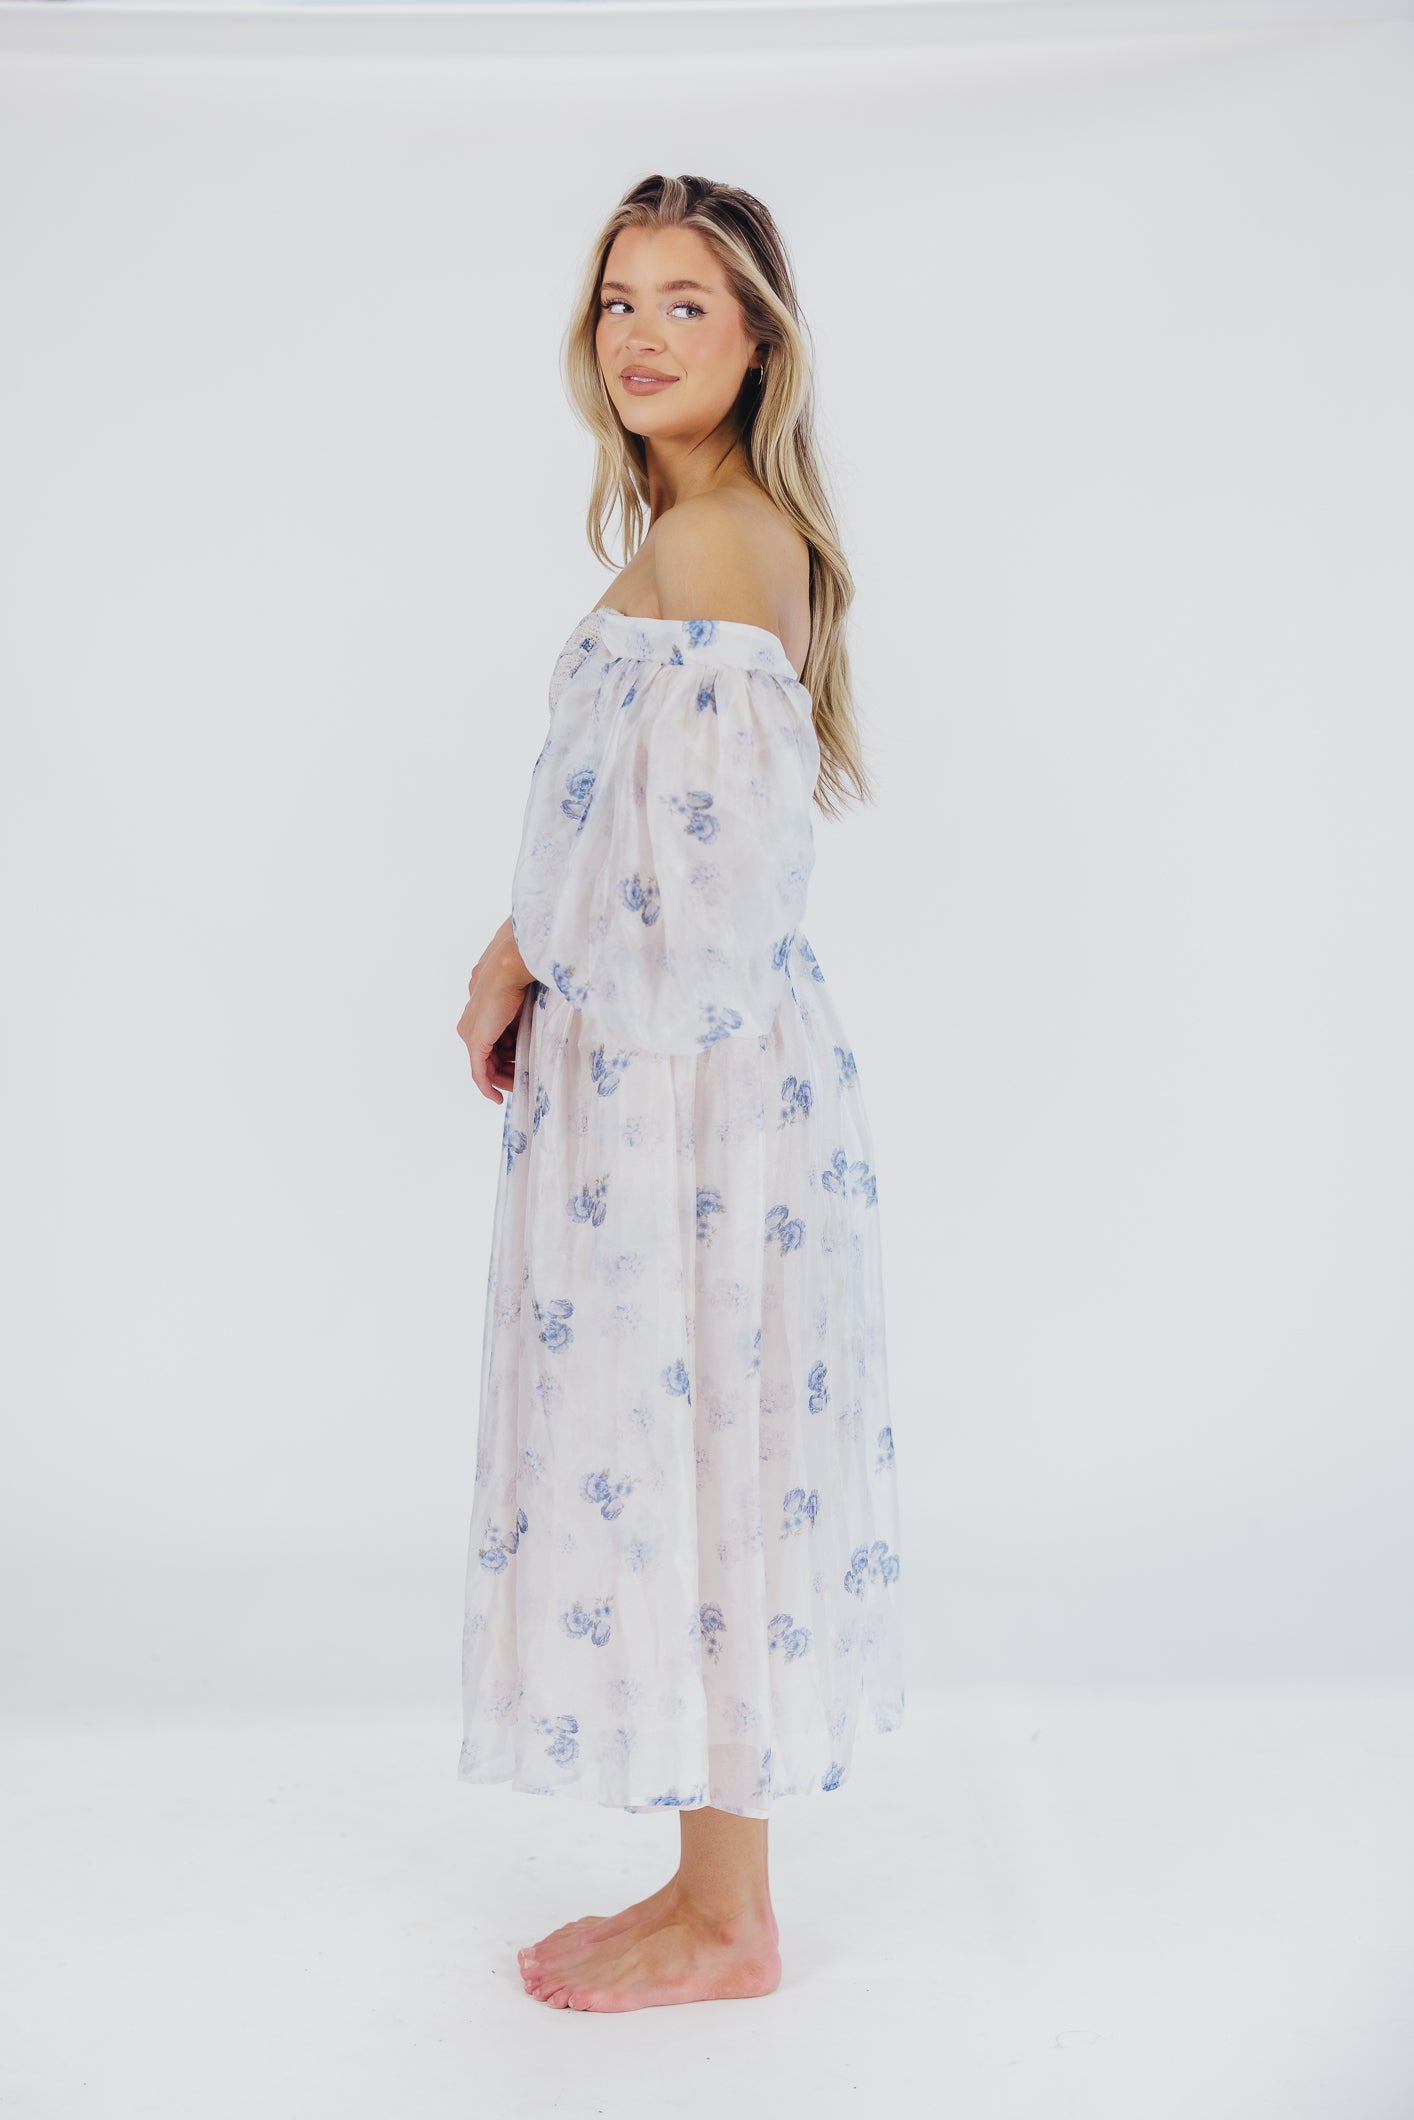 Harlow Maxi Dress in Muted Blue Floral - Bump Friendly & Inclusive Sizing (S-3XL)